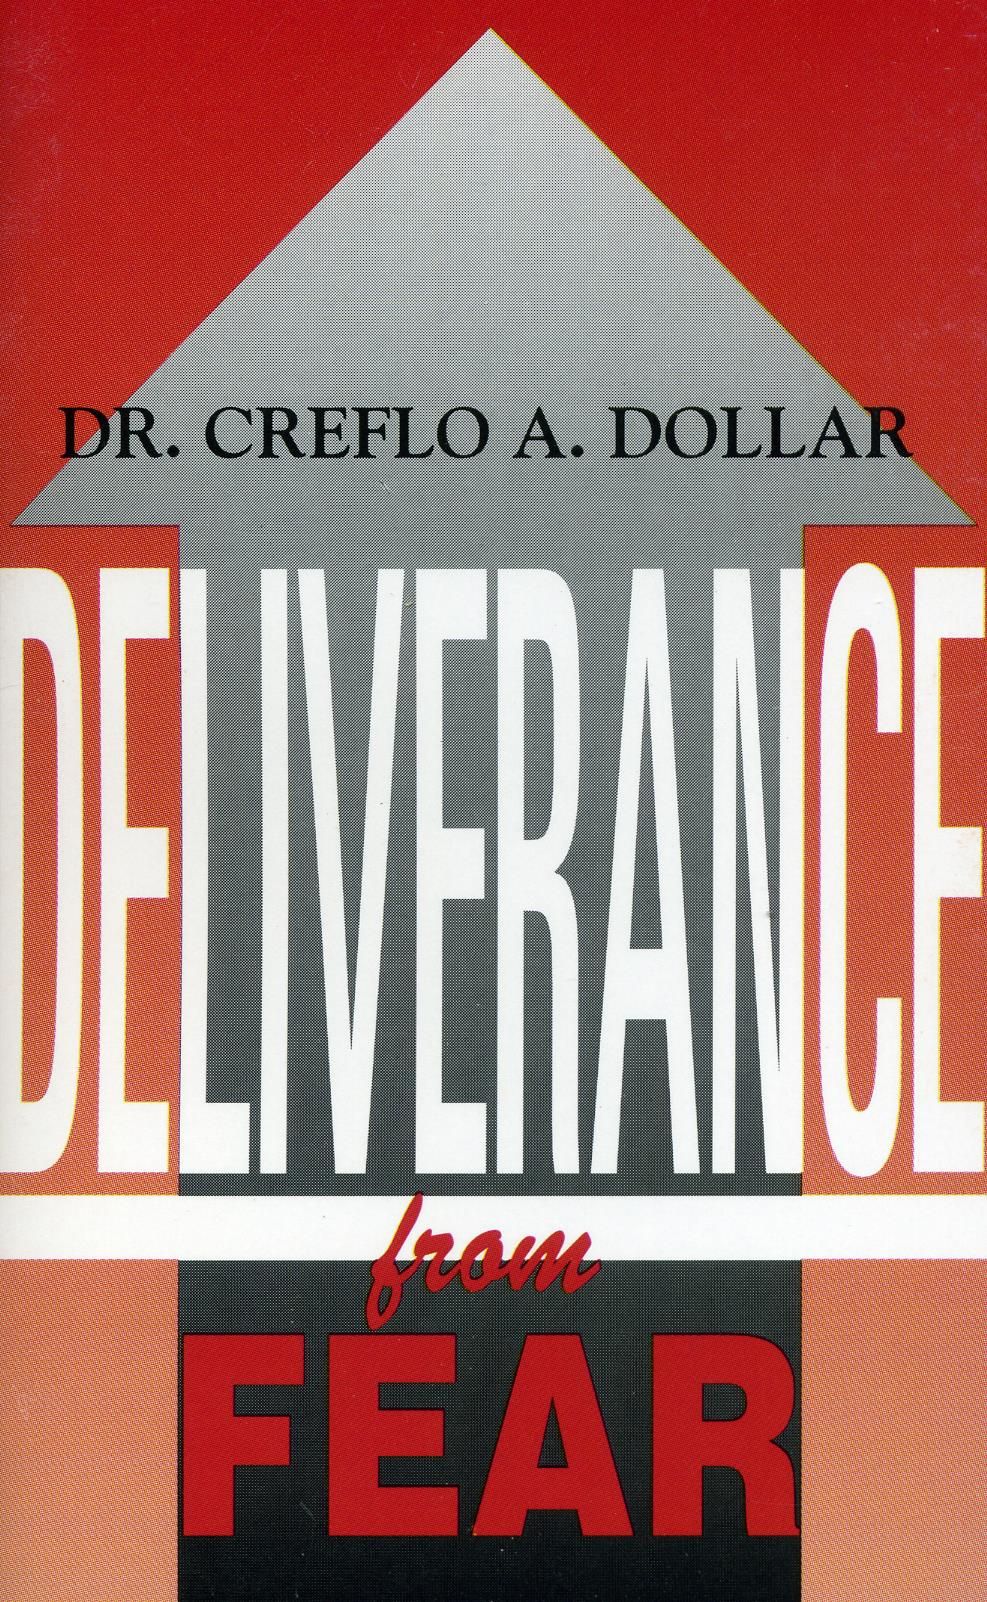 C. Dollar: Deliverance from Fear